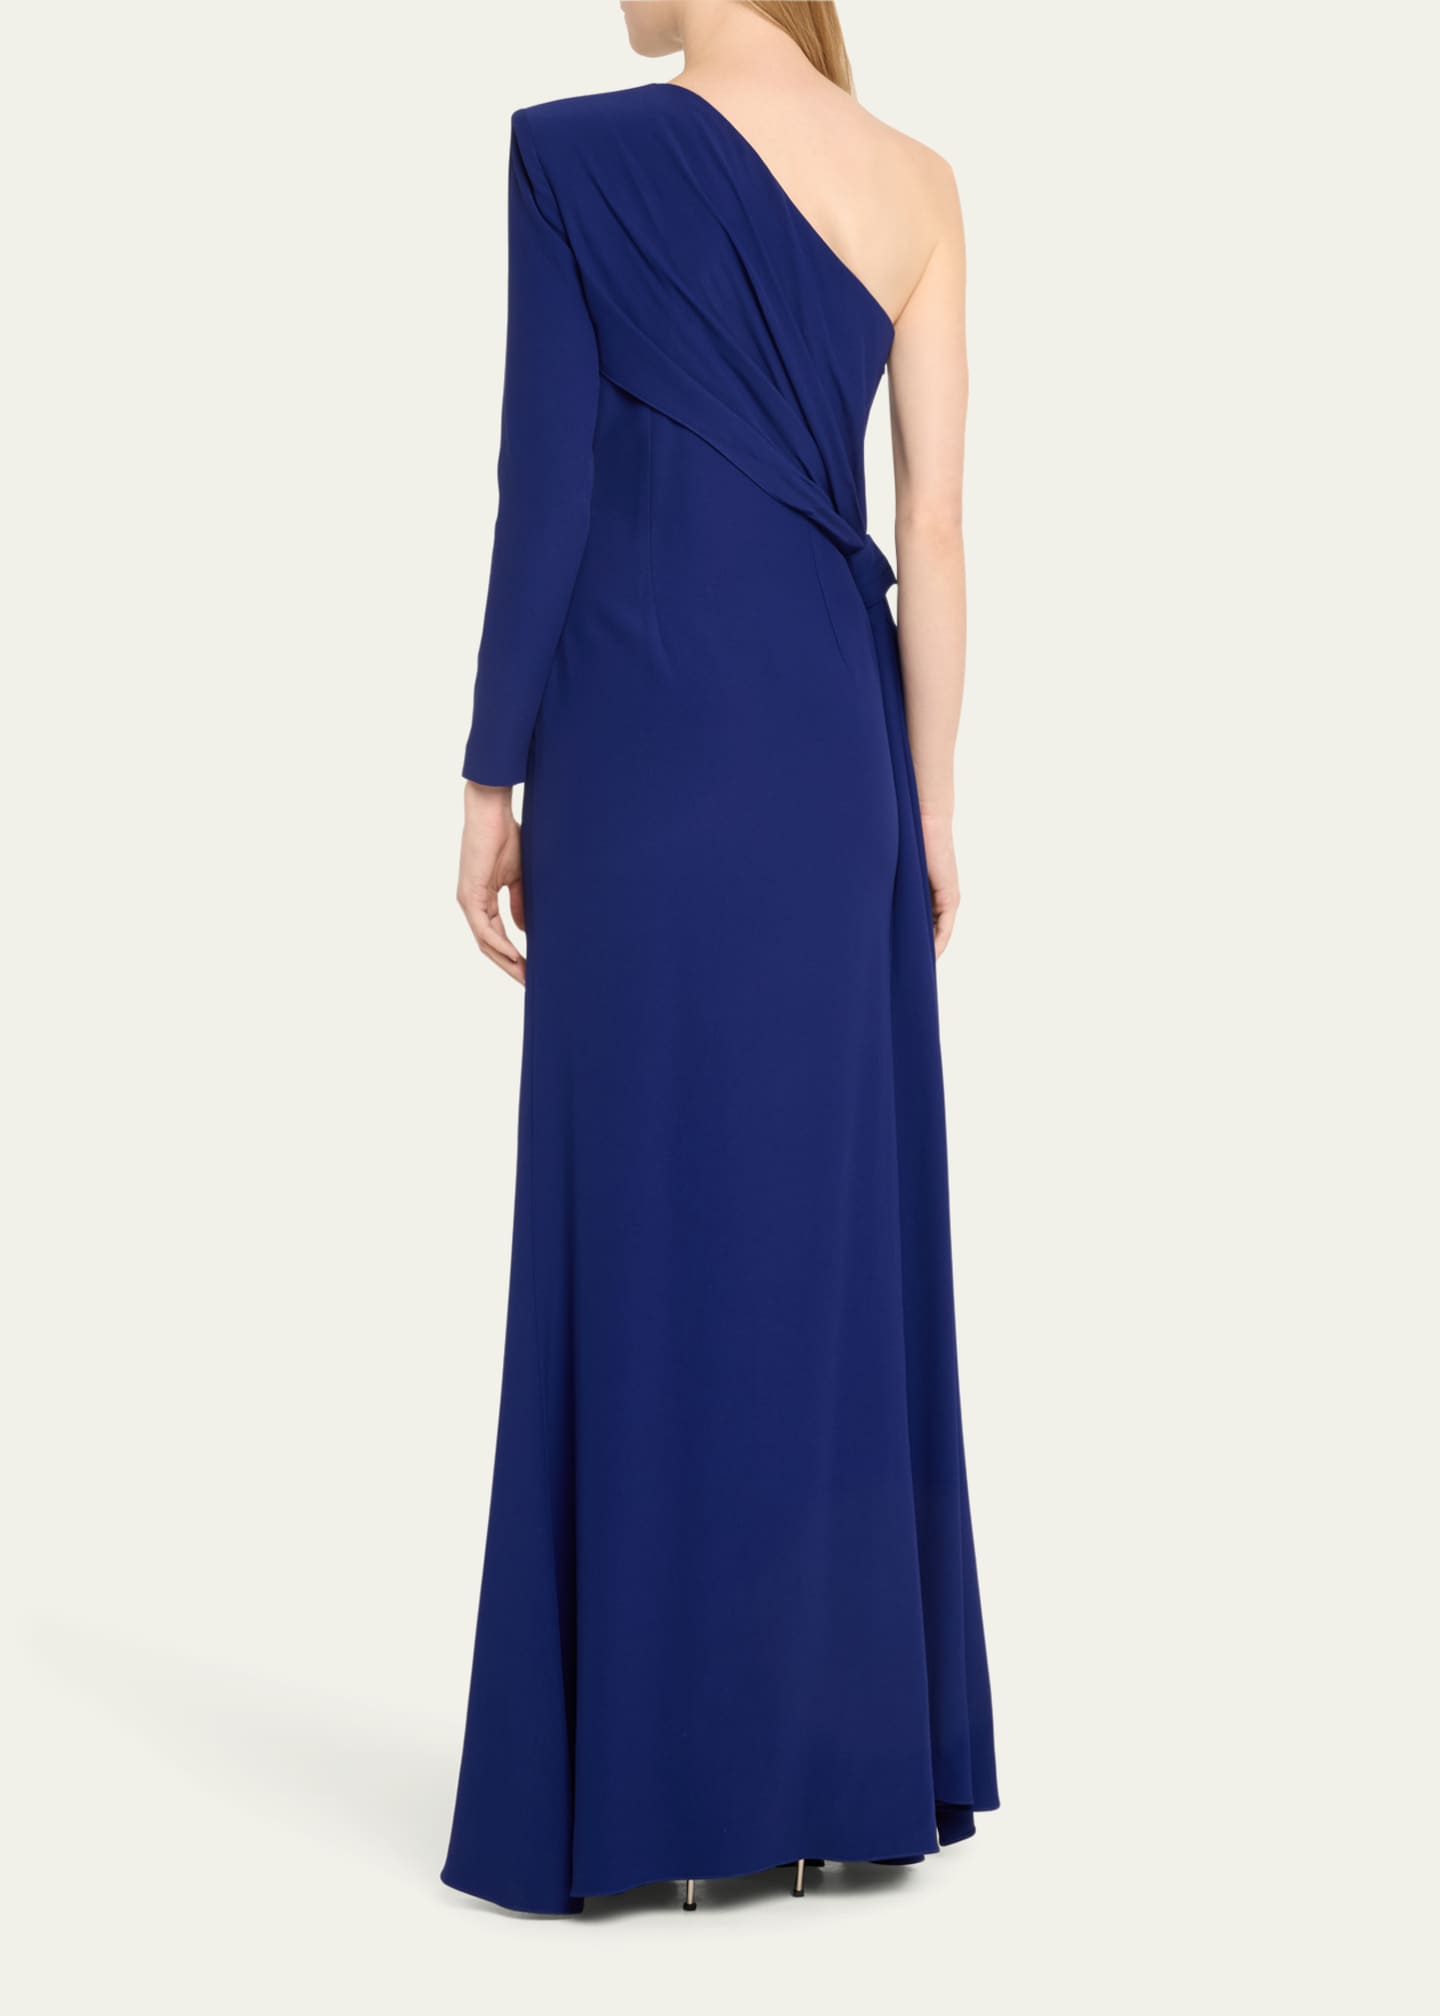 Alexander McQueen Crepe One-Shoulder Gown with Draped Detail - Bergdorf ...